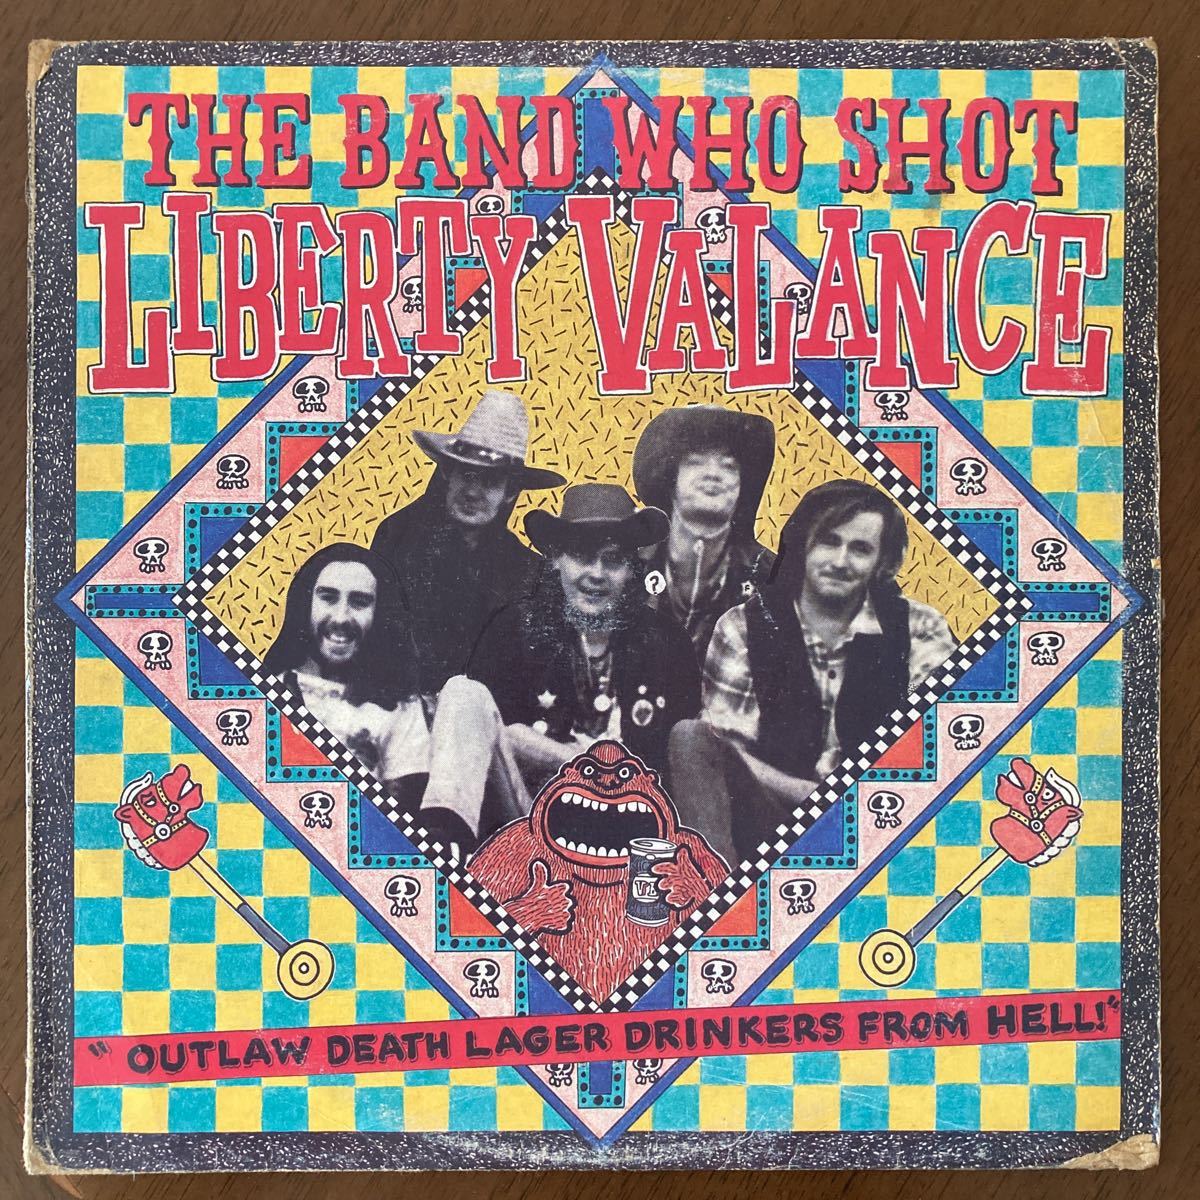 The Band Who Shot Liberty Valance Outlaw Death Lager Drinkers From Hell /LP/サイコビリー_画像1